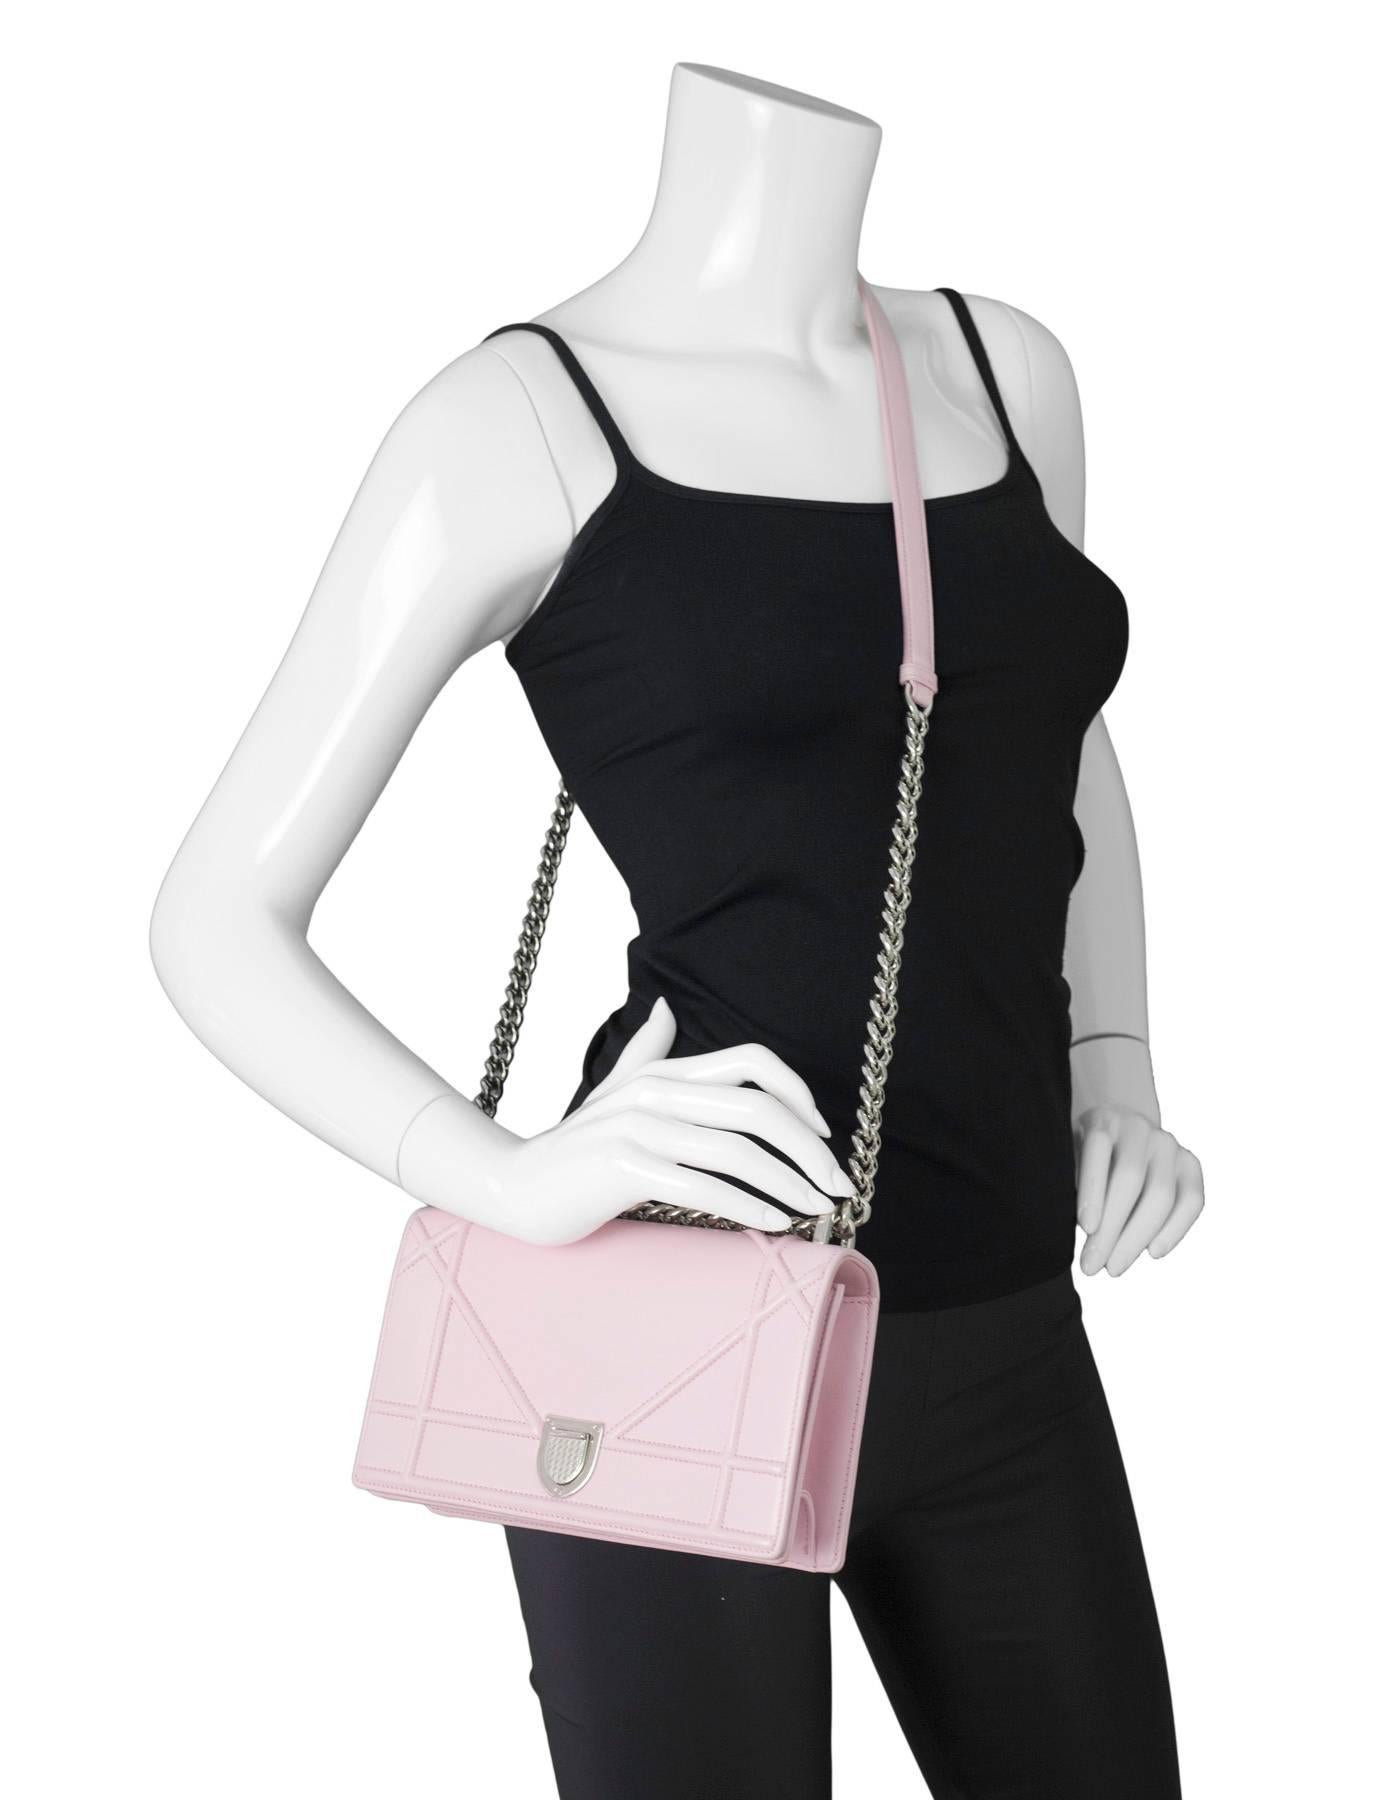 Christian Dior Pink Diorama Flap Bag
Features adjustable shoulder bag

Made In: Italy
Color: Pink
Materials: Leather, metal
Opening: Flap top with push lock
Exterior Pockets: None
Interior Pockets: One zip pocket, one wall pocket
Retail Price: